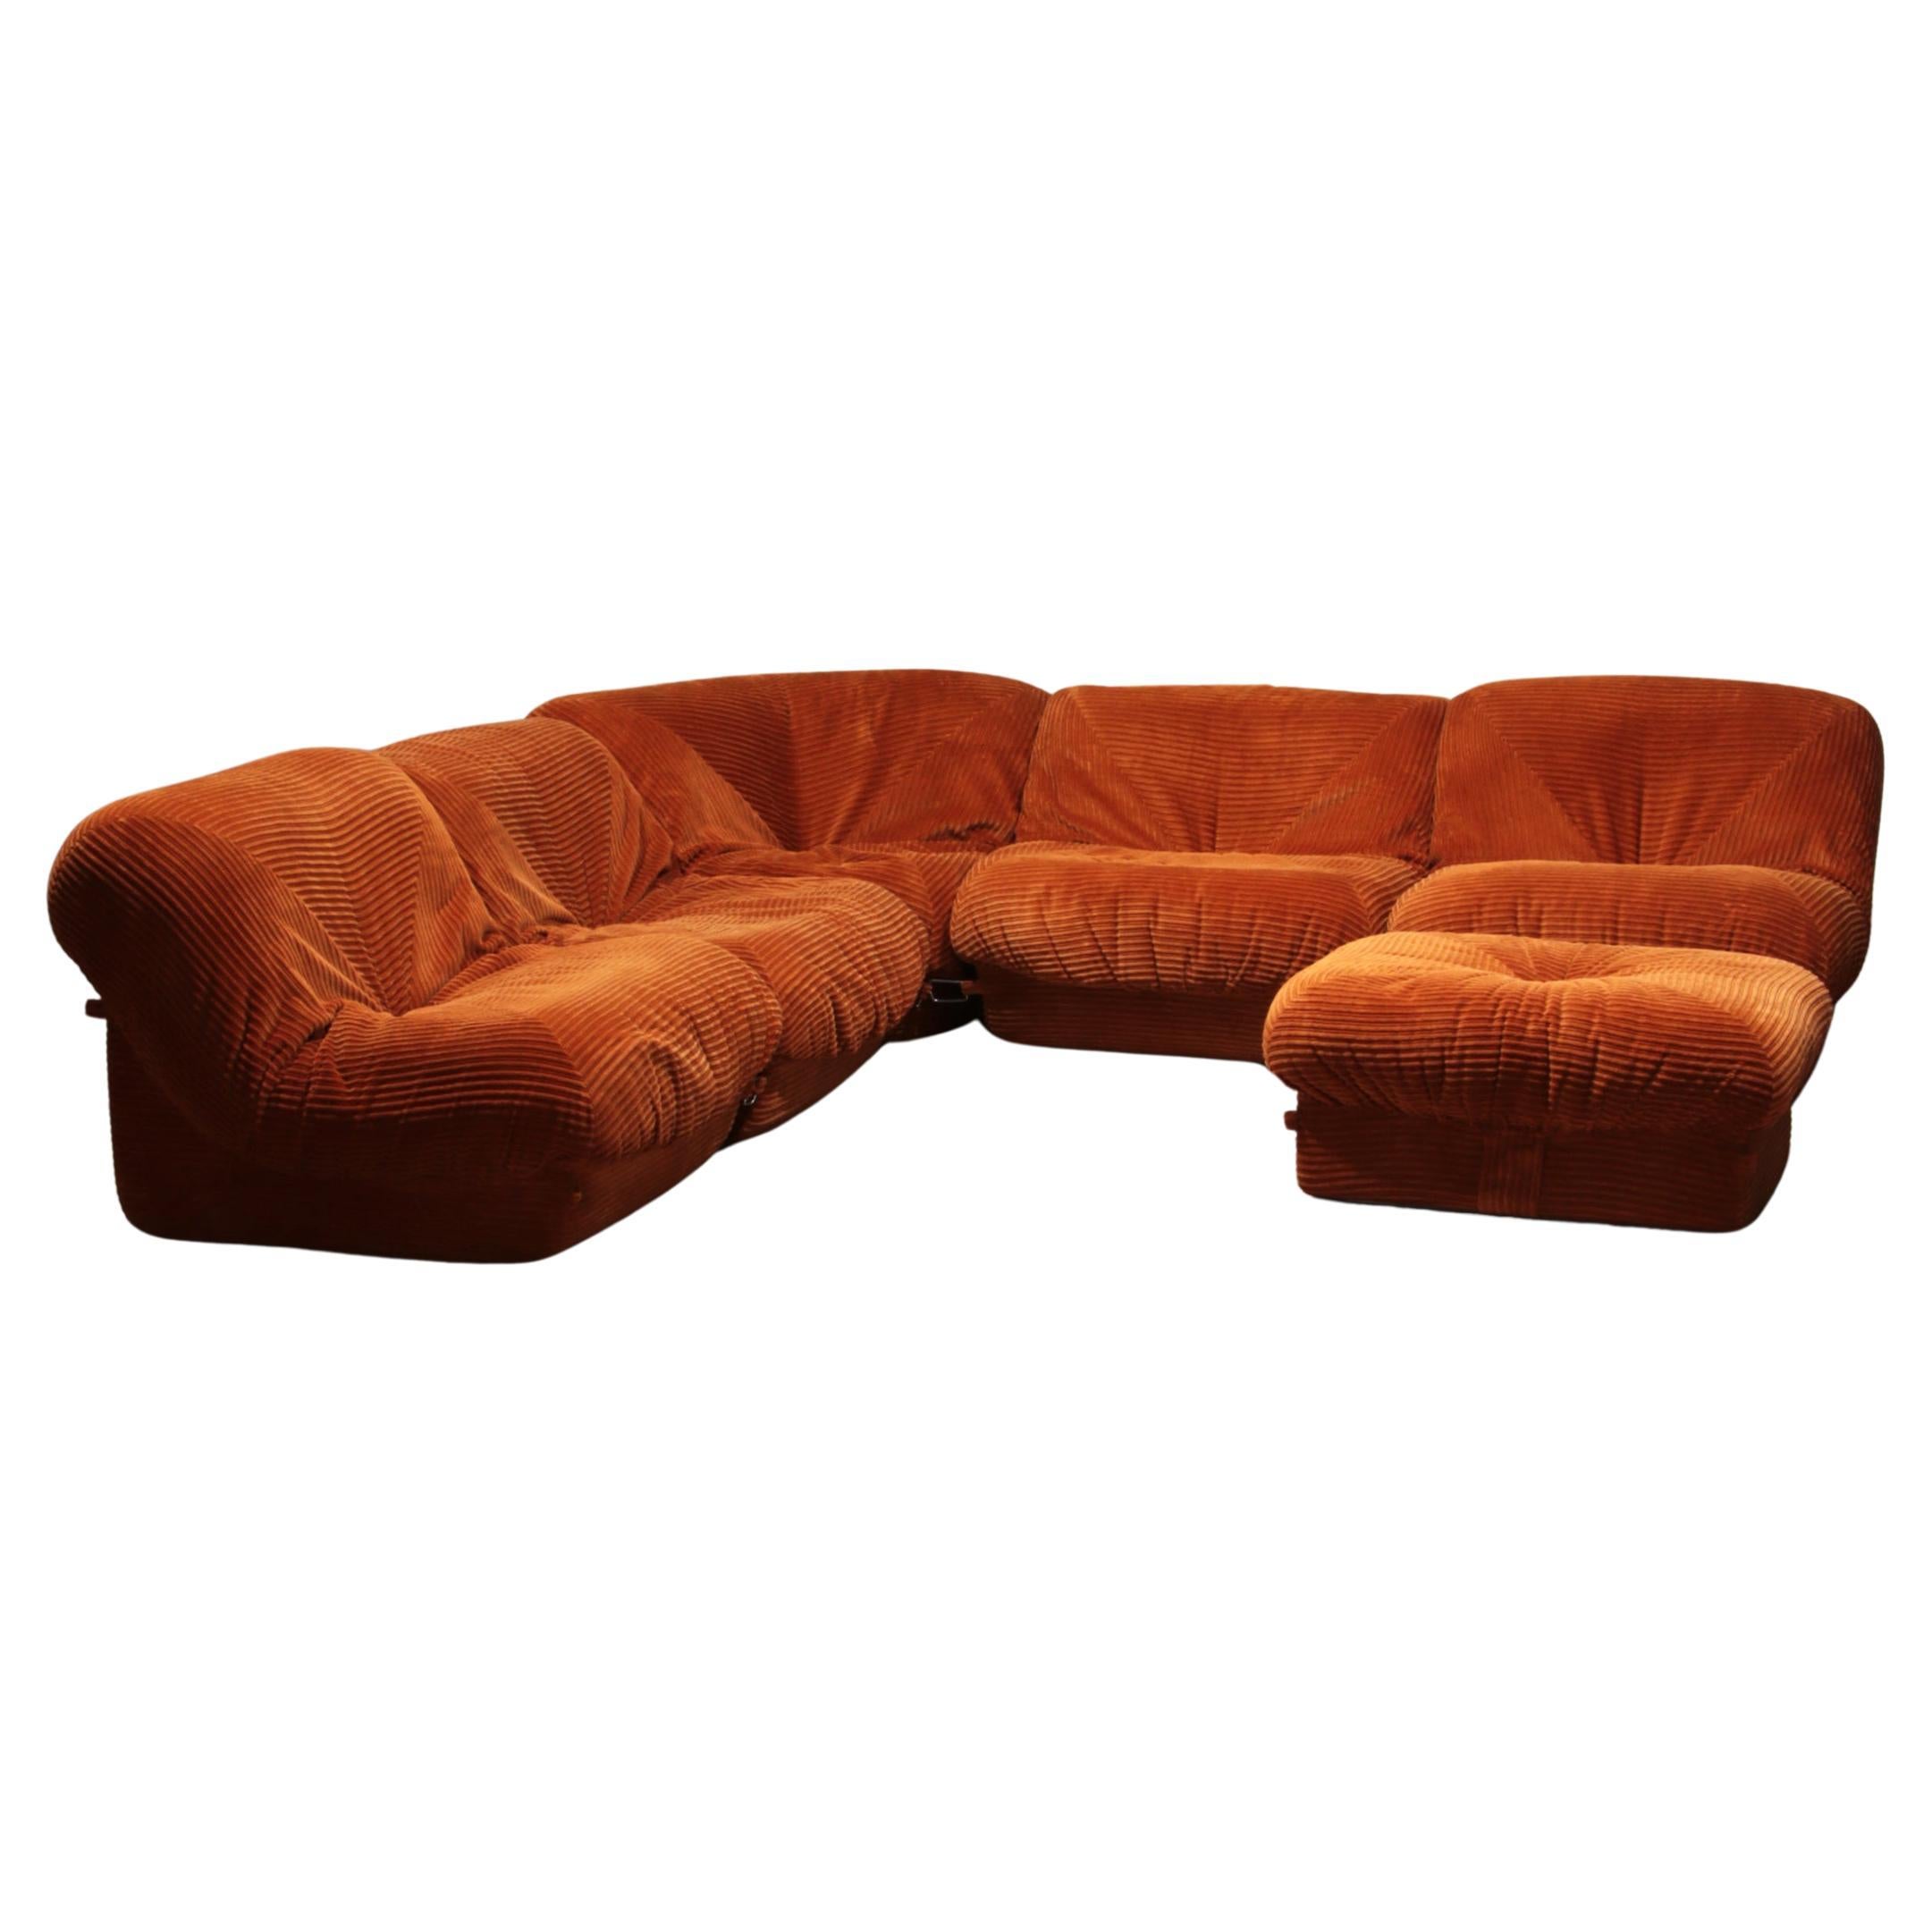 Airborne sectional sofa with ottoman 'Patate' in orange Corduroy wide ribbed  For Sale